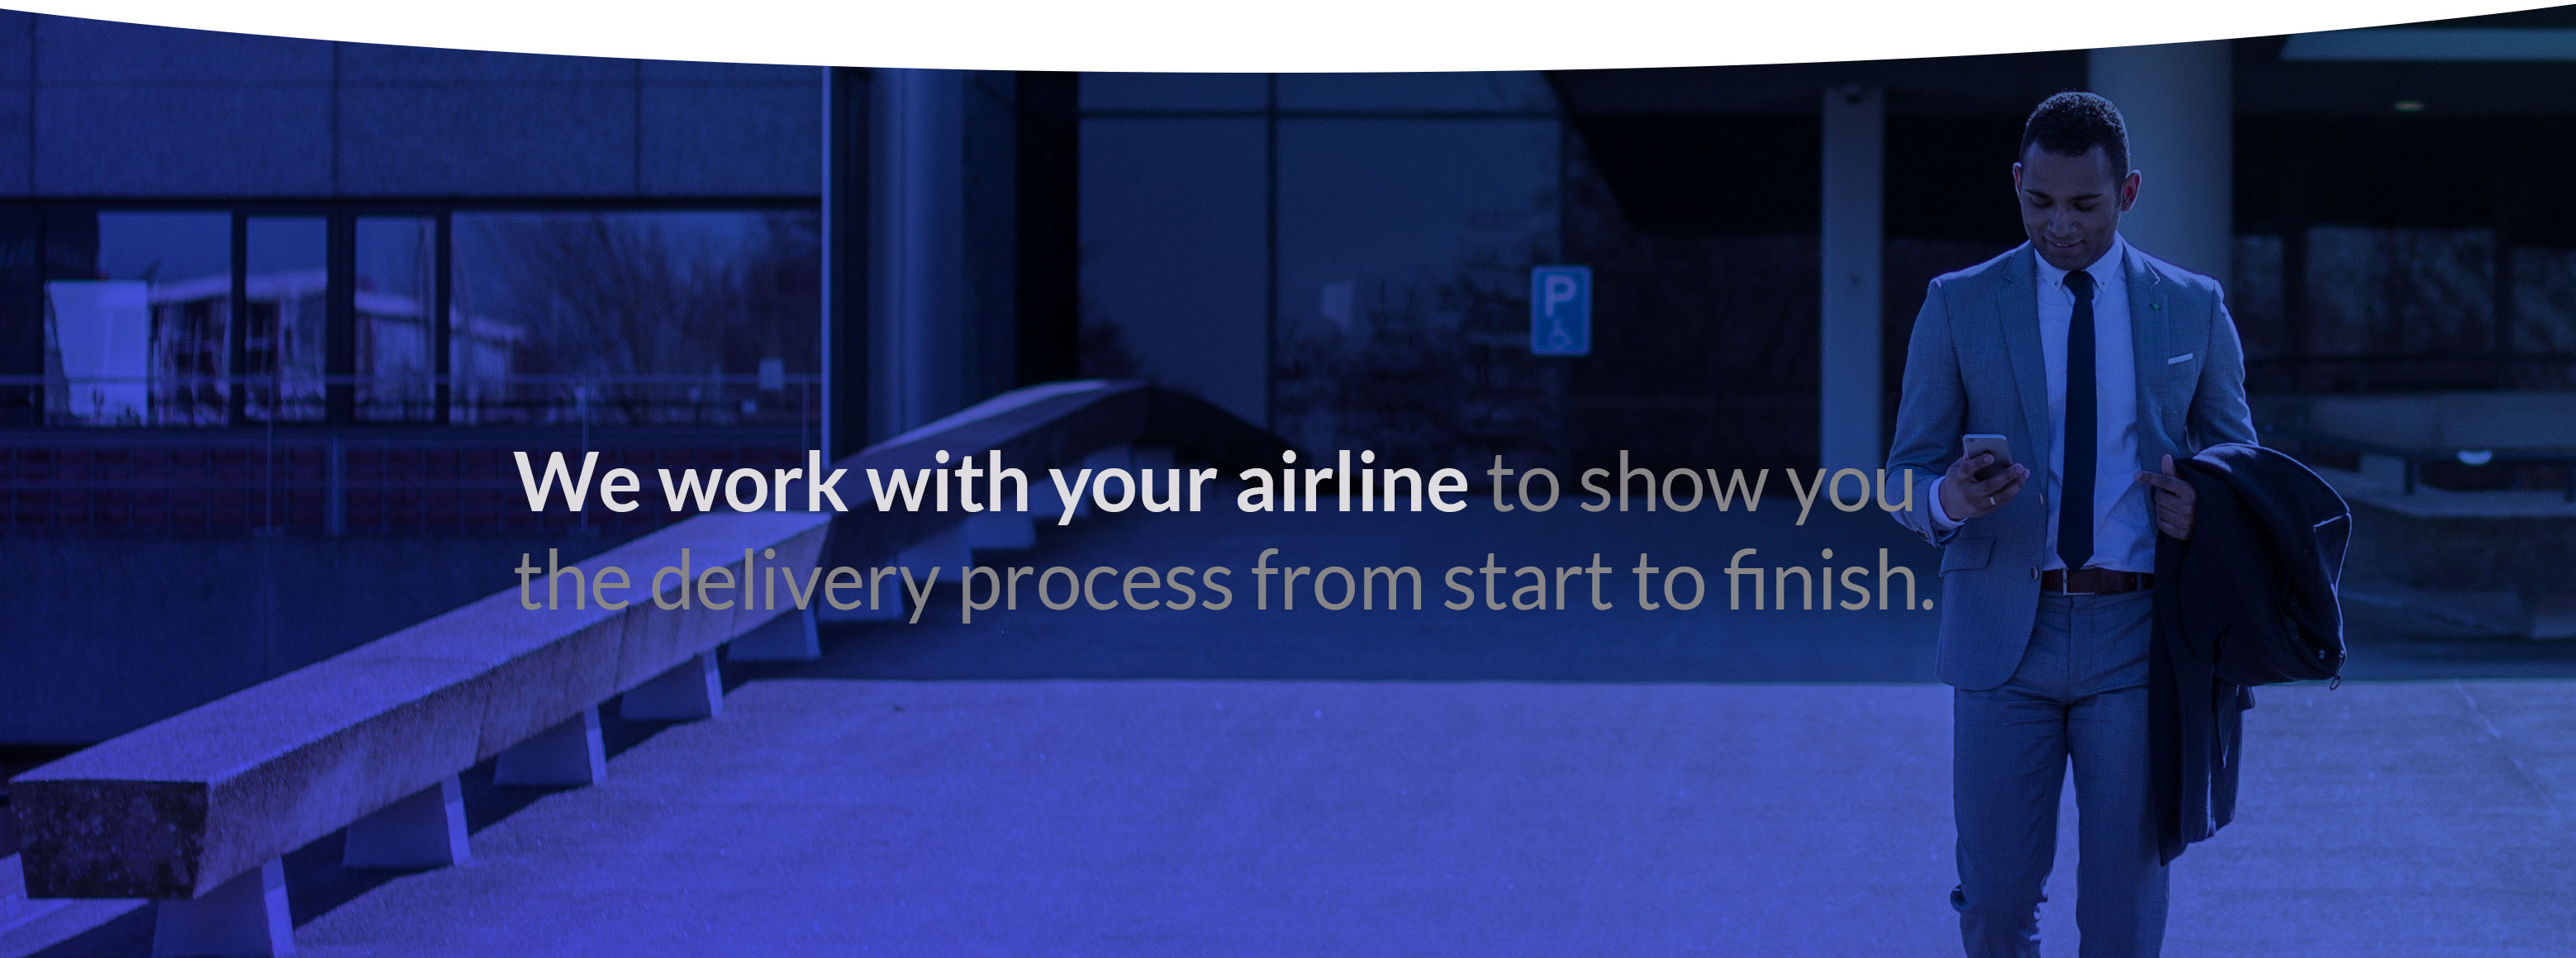 header: Text we work with your airline to show you the delivery process from start to finish.